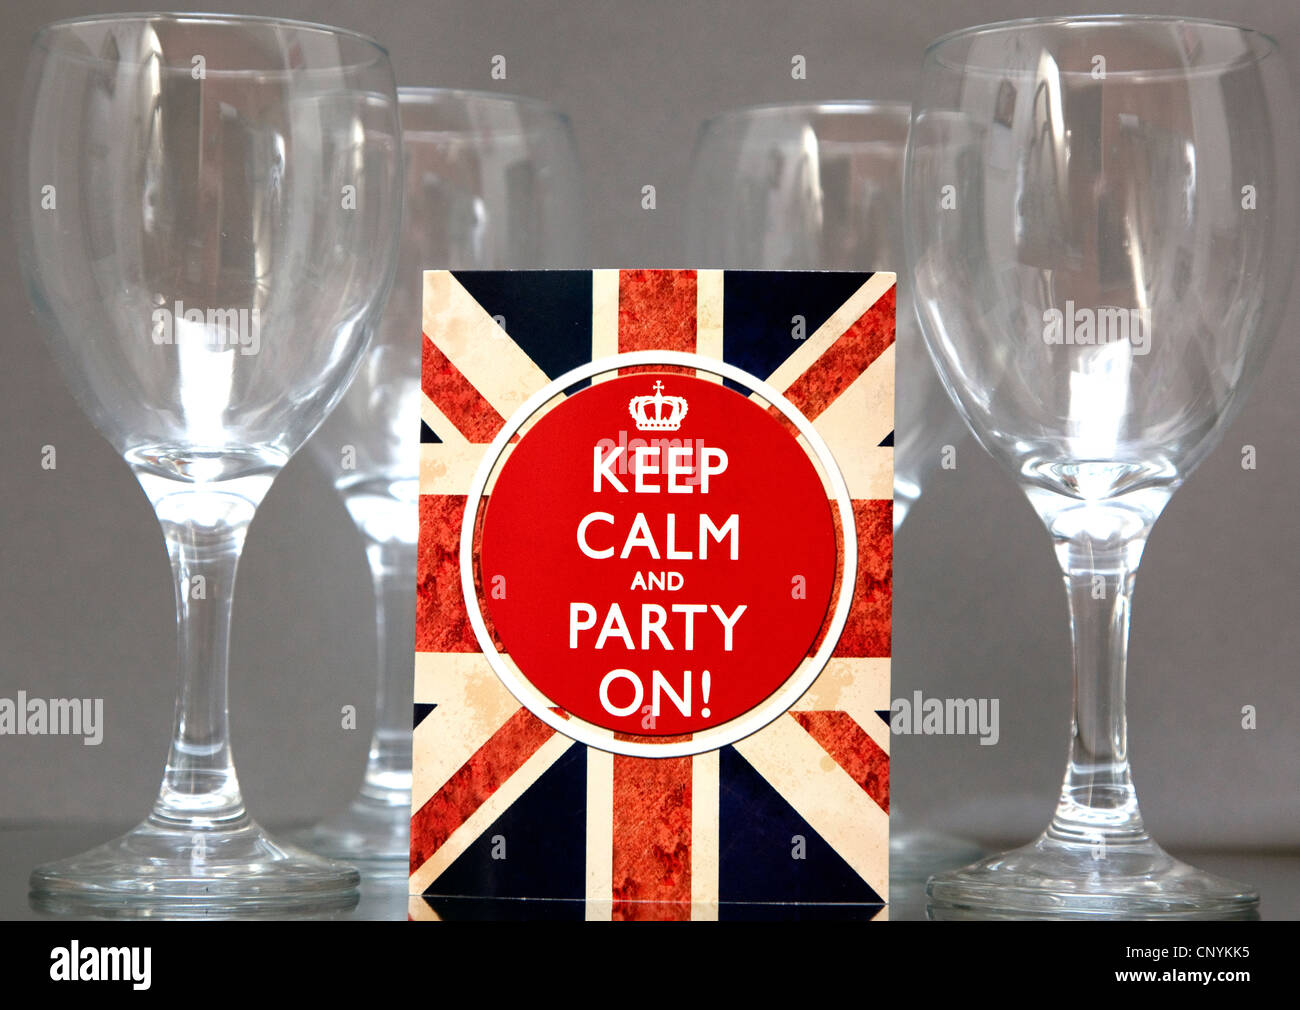 Keep Calm and Party On invitation card, London Stock Photo